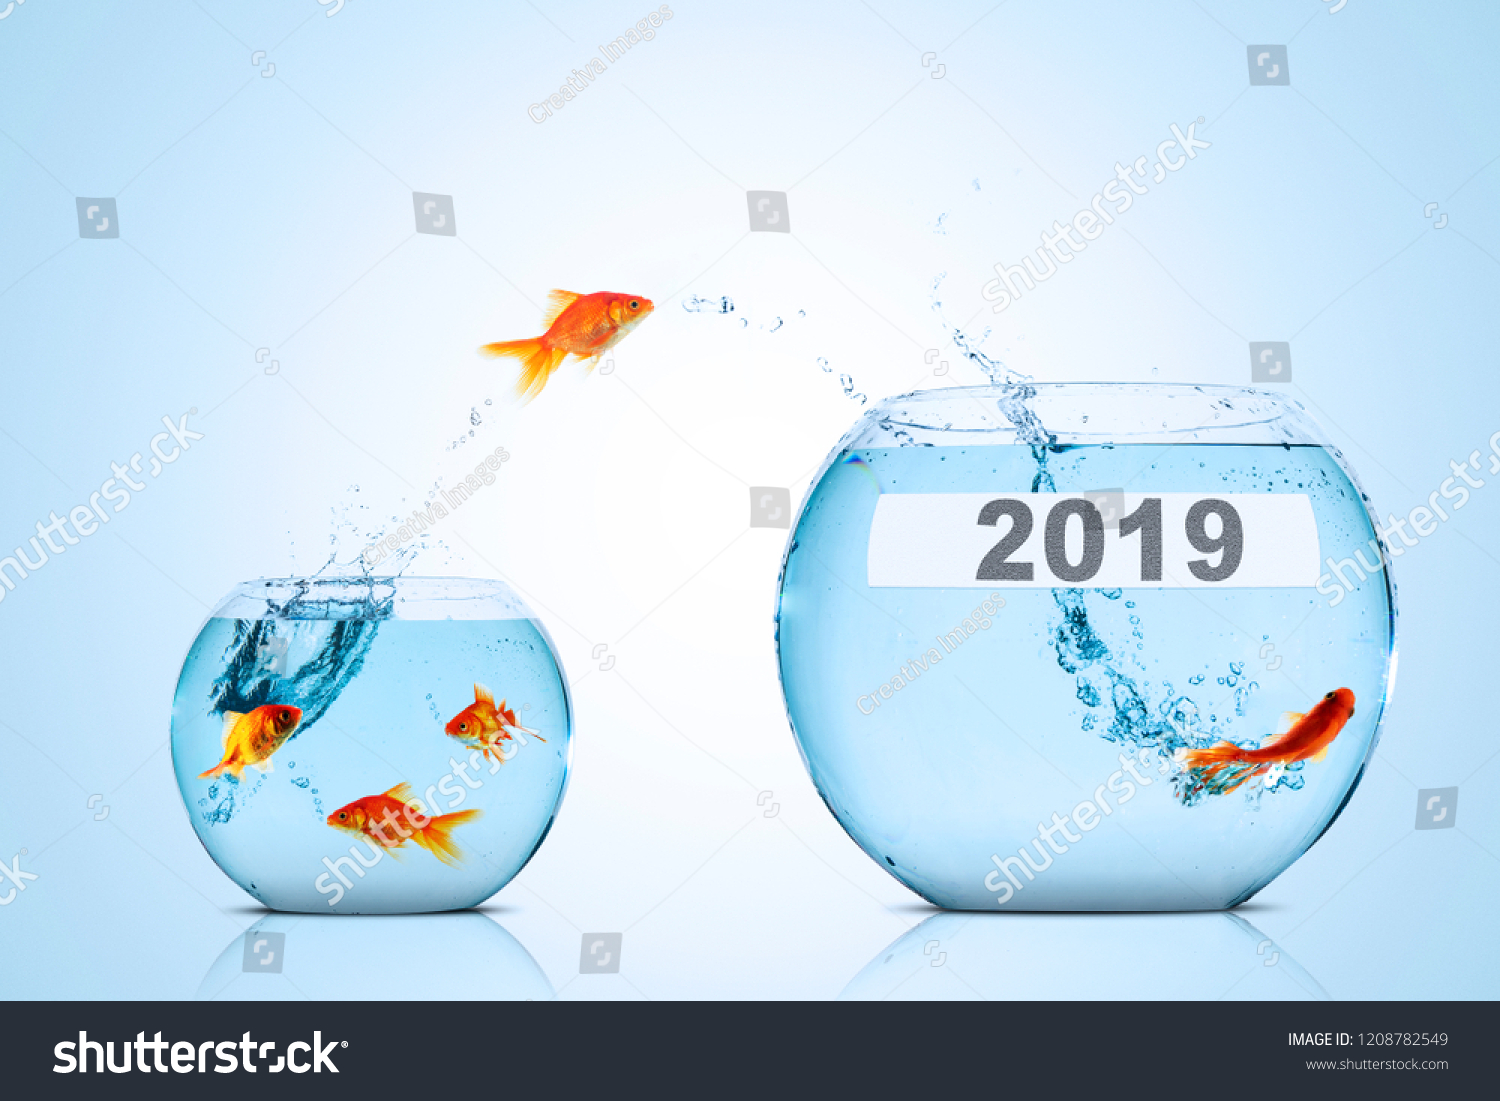 Image of golden fish leaping to larger aquarium with numbers 2019 #1208782549